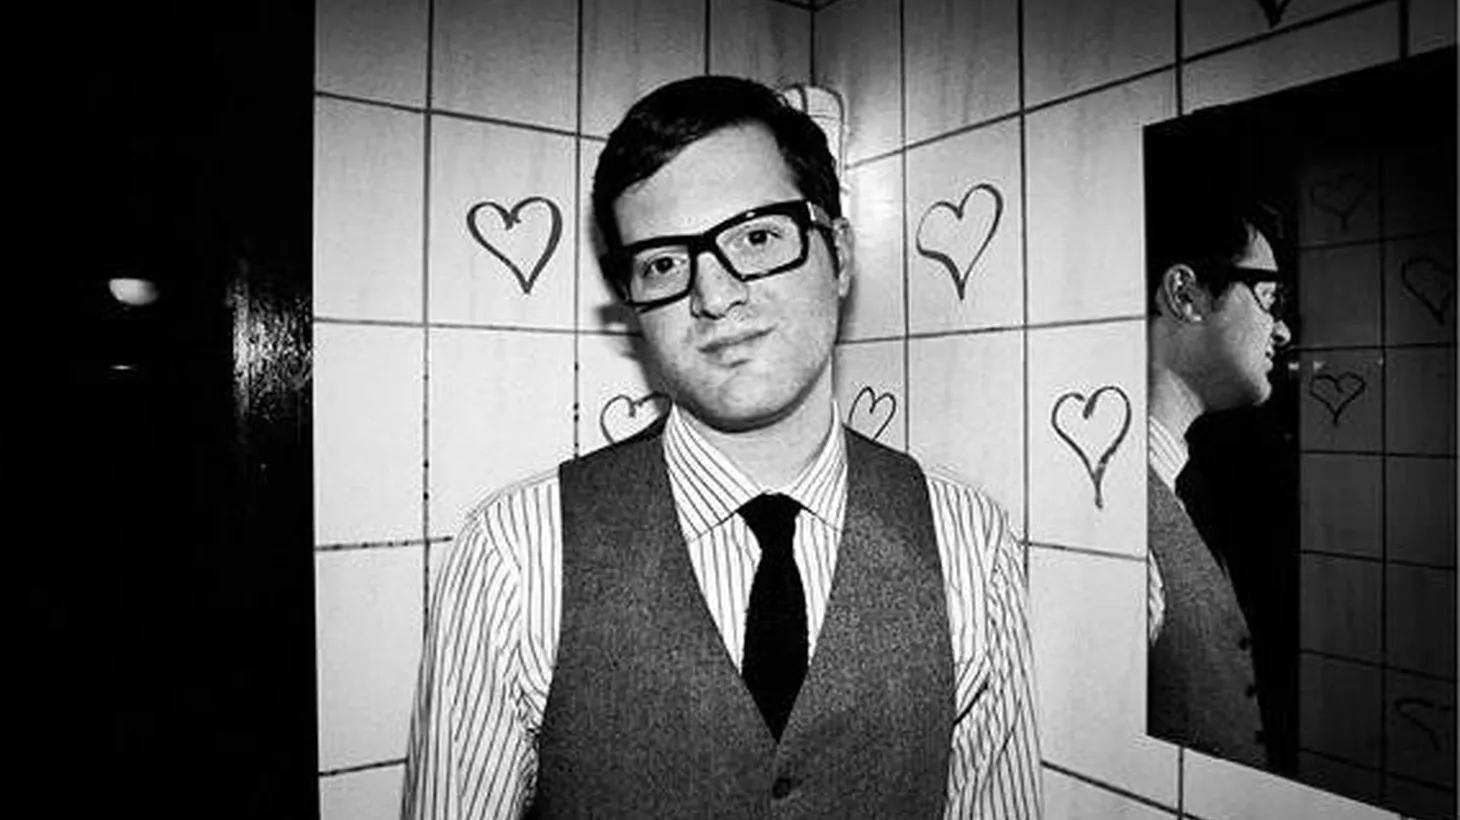 Mayer Hawthorne a soulful singer from Ann Arbor, Michigan brings his band to perform a set of love songs when he joins Morning Becomes Eclectic at 11:15am.